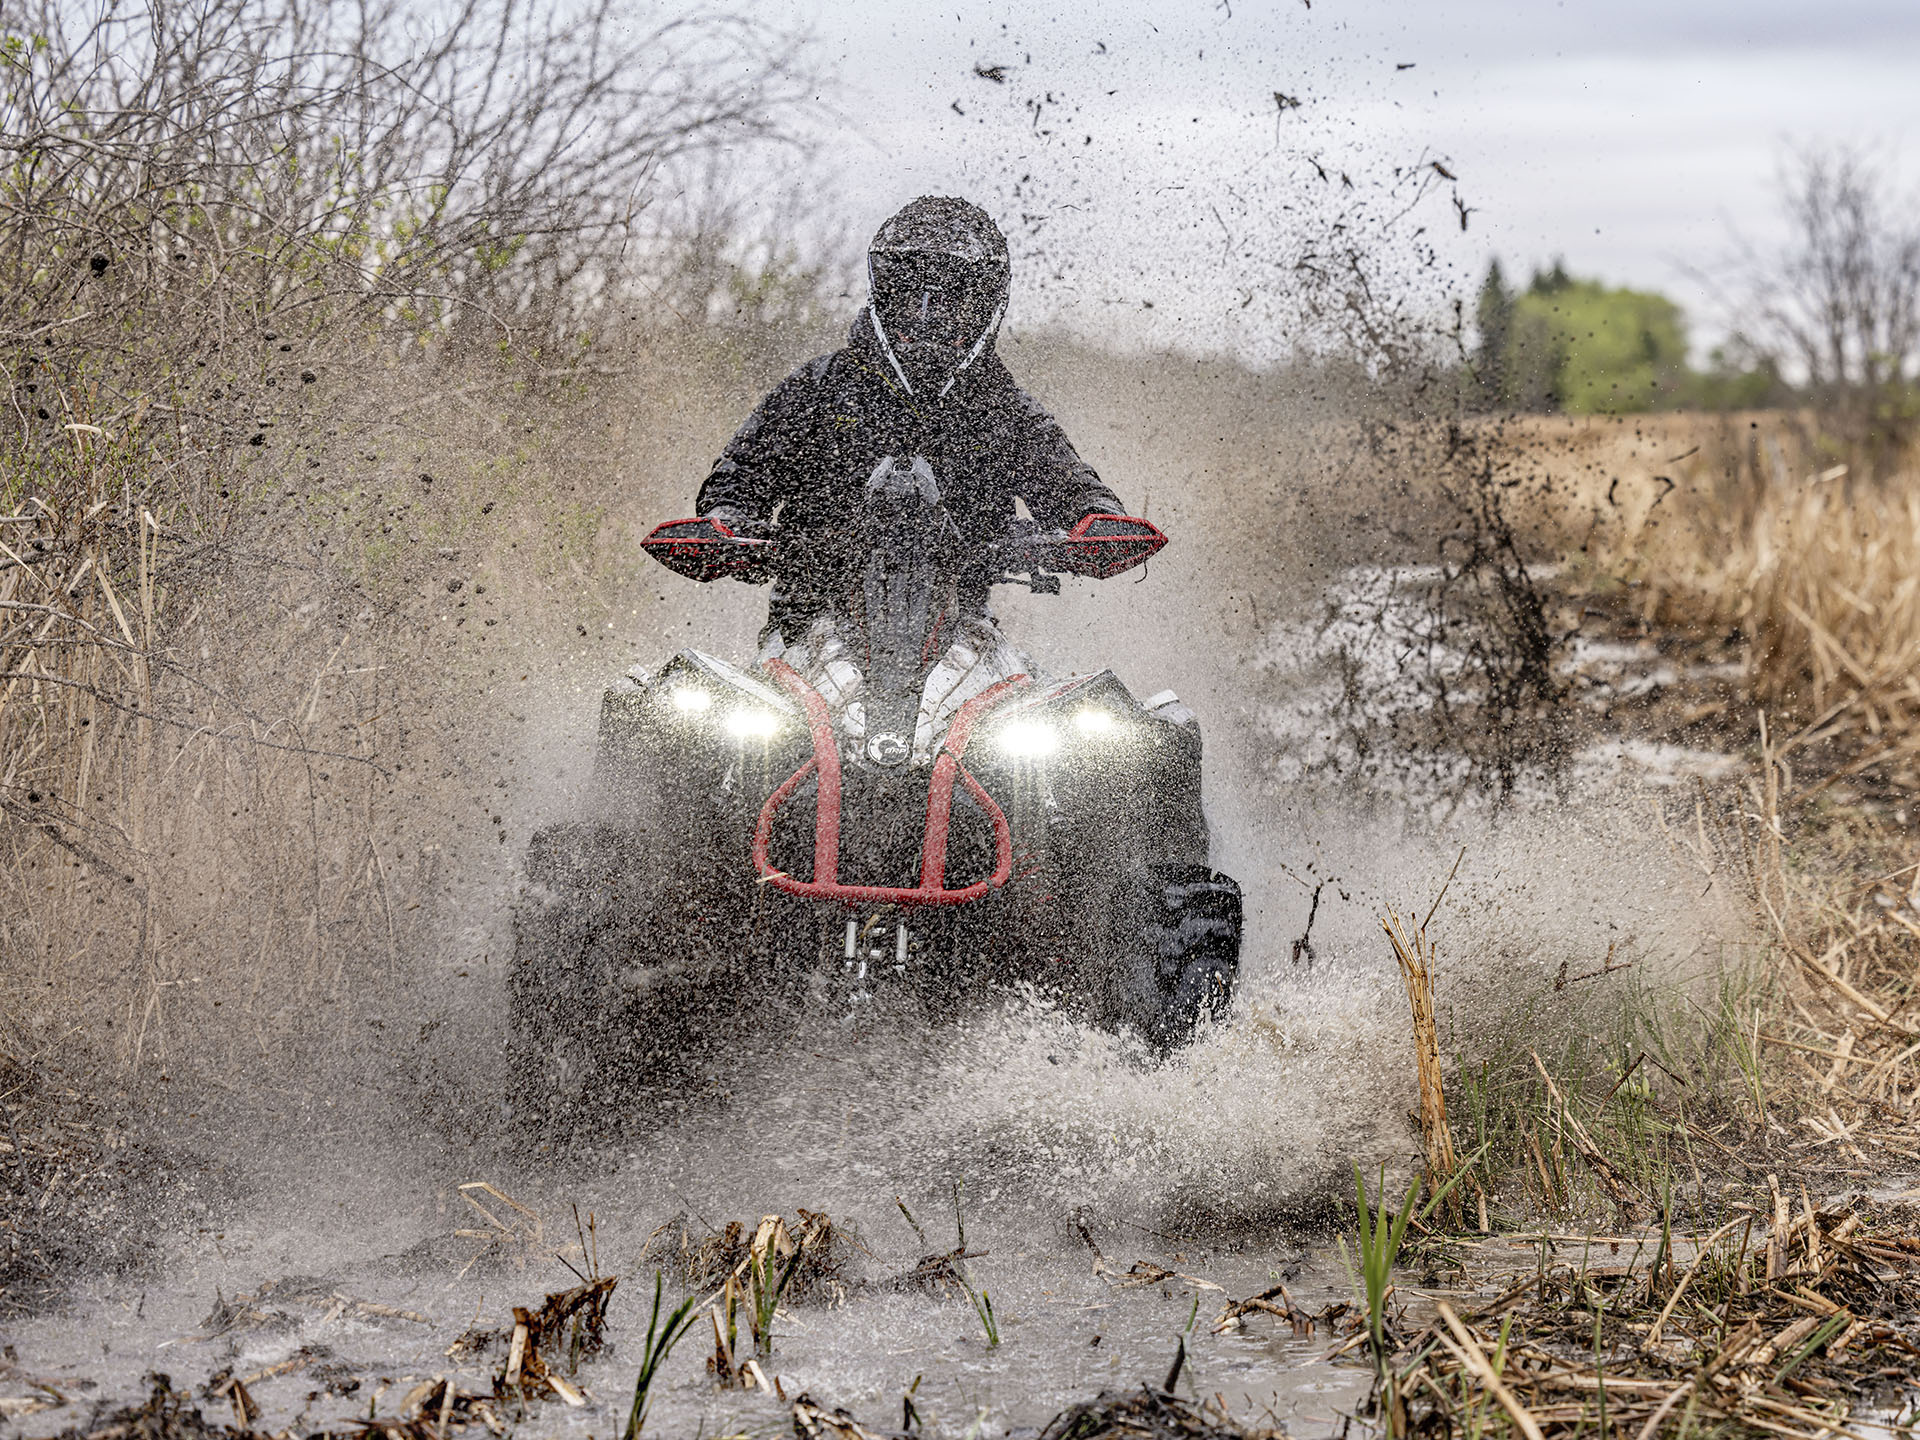 Rider driving a 2024 Can-Am Renegade X MR ATV in deep mud